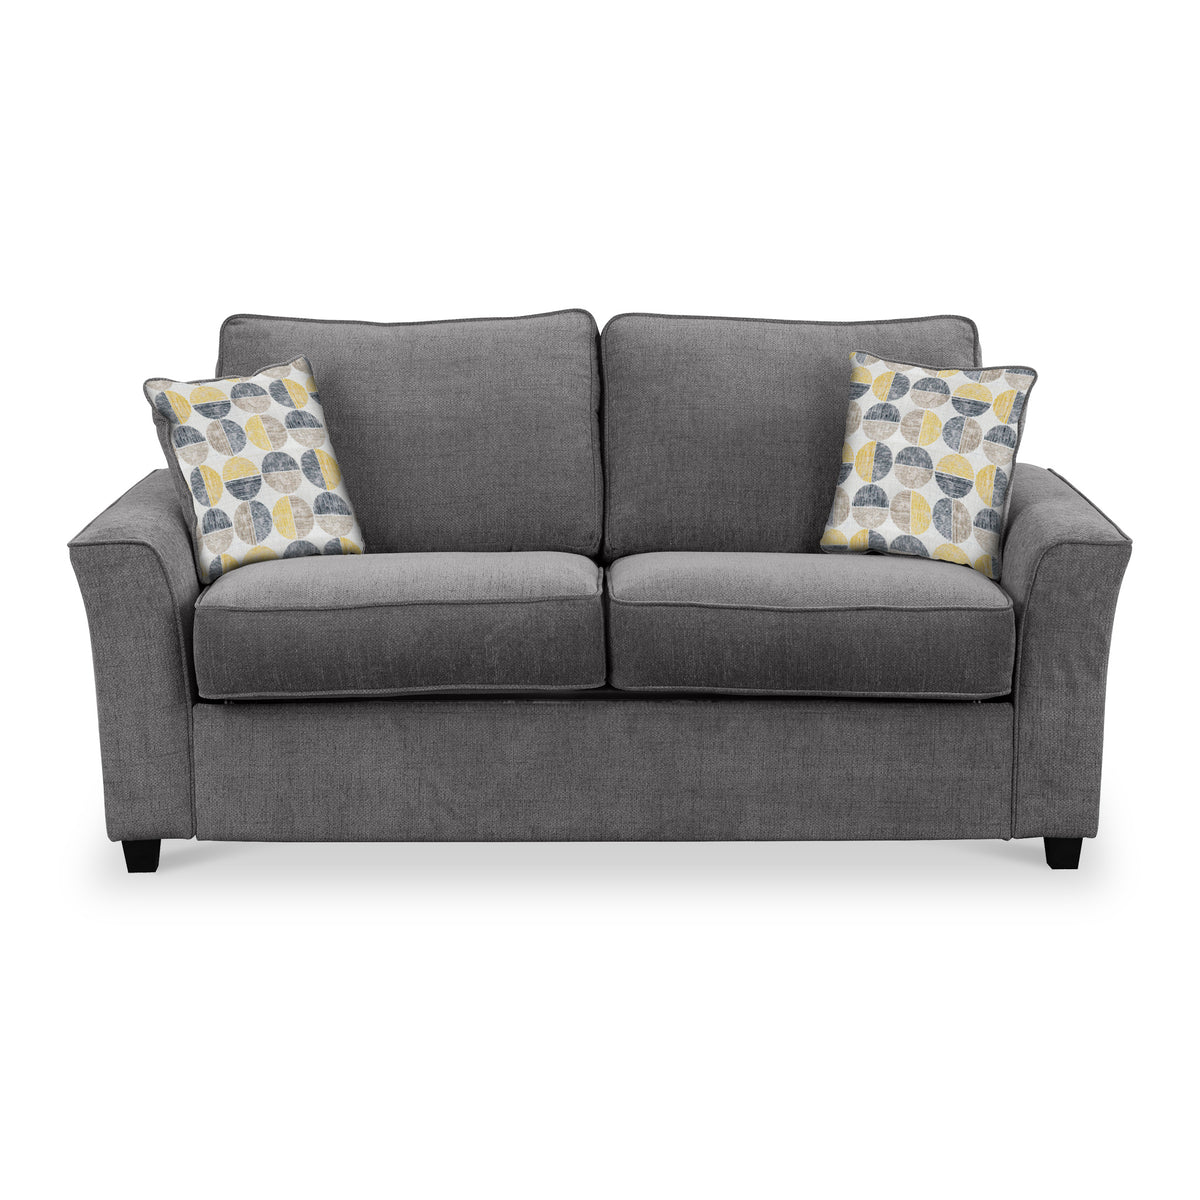 Boston 2 Seater Sofabed in Charcoal with Rufus Beige Cushions by Roseland Furniture